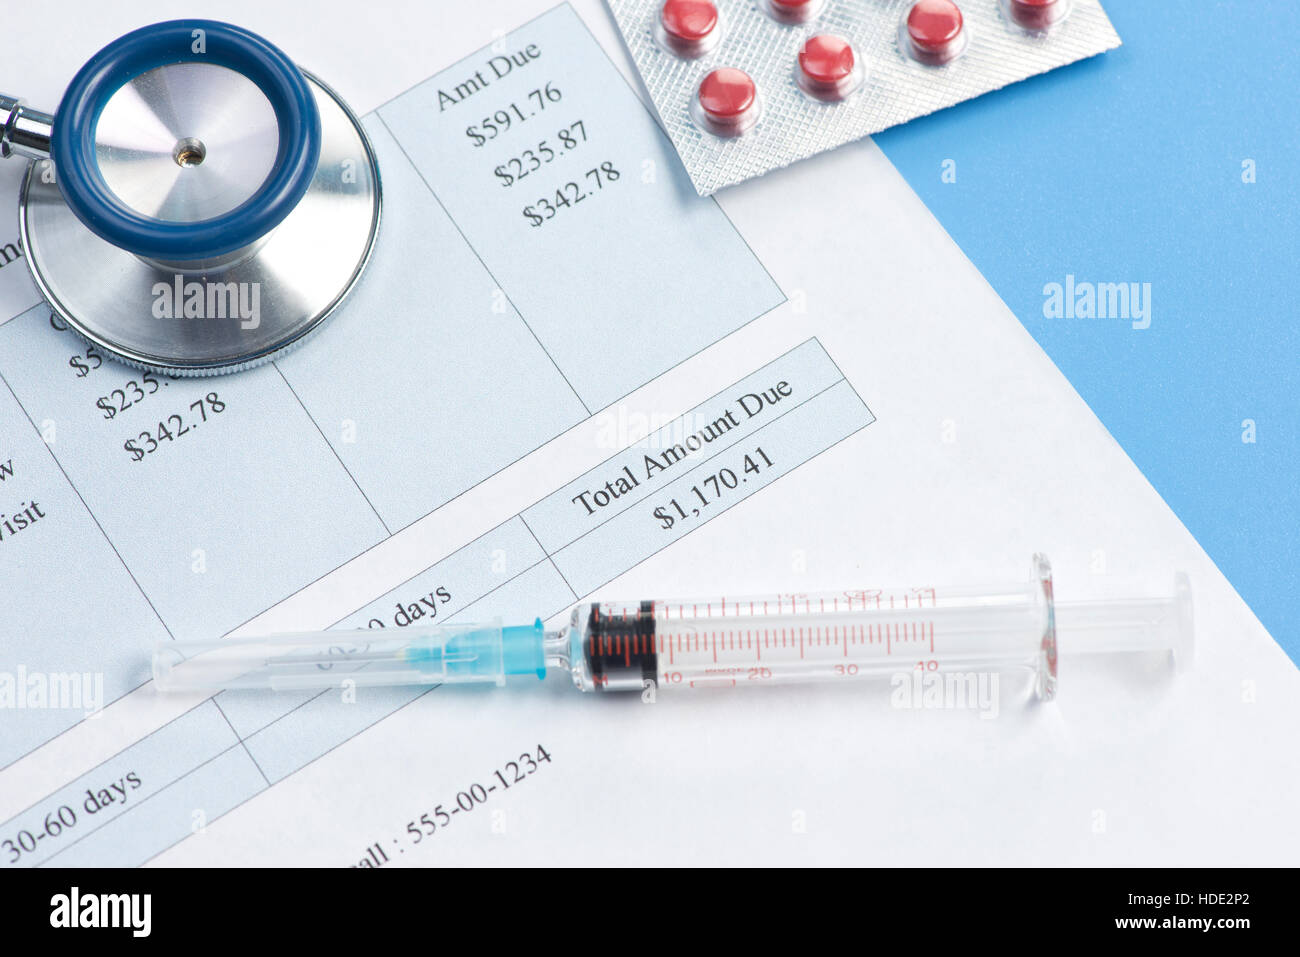 Hypothetical hospital bill with syringe and medication.  Document created by photographer. Stock Photo